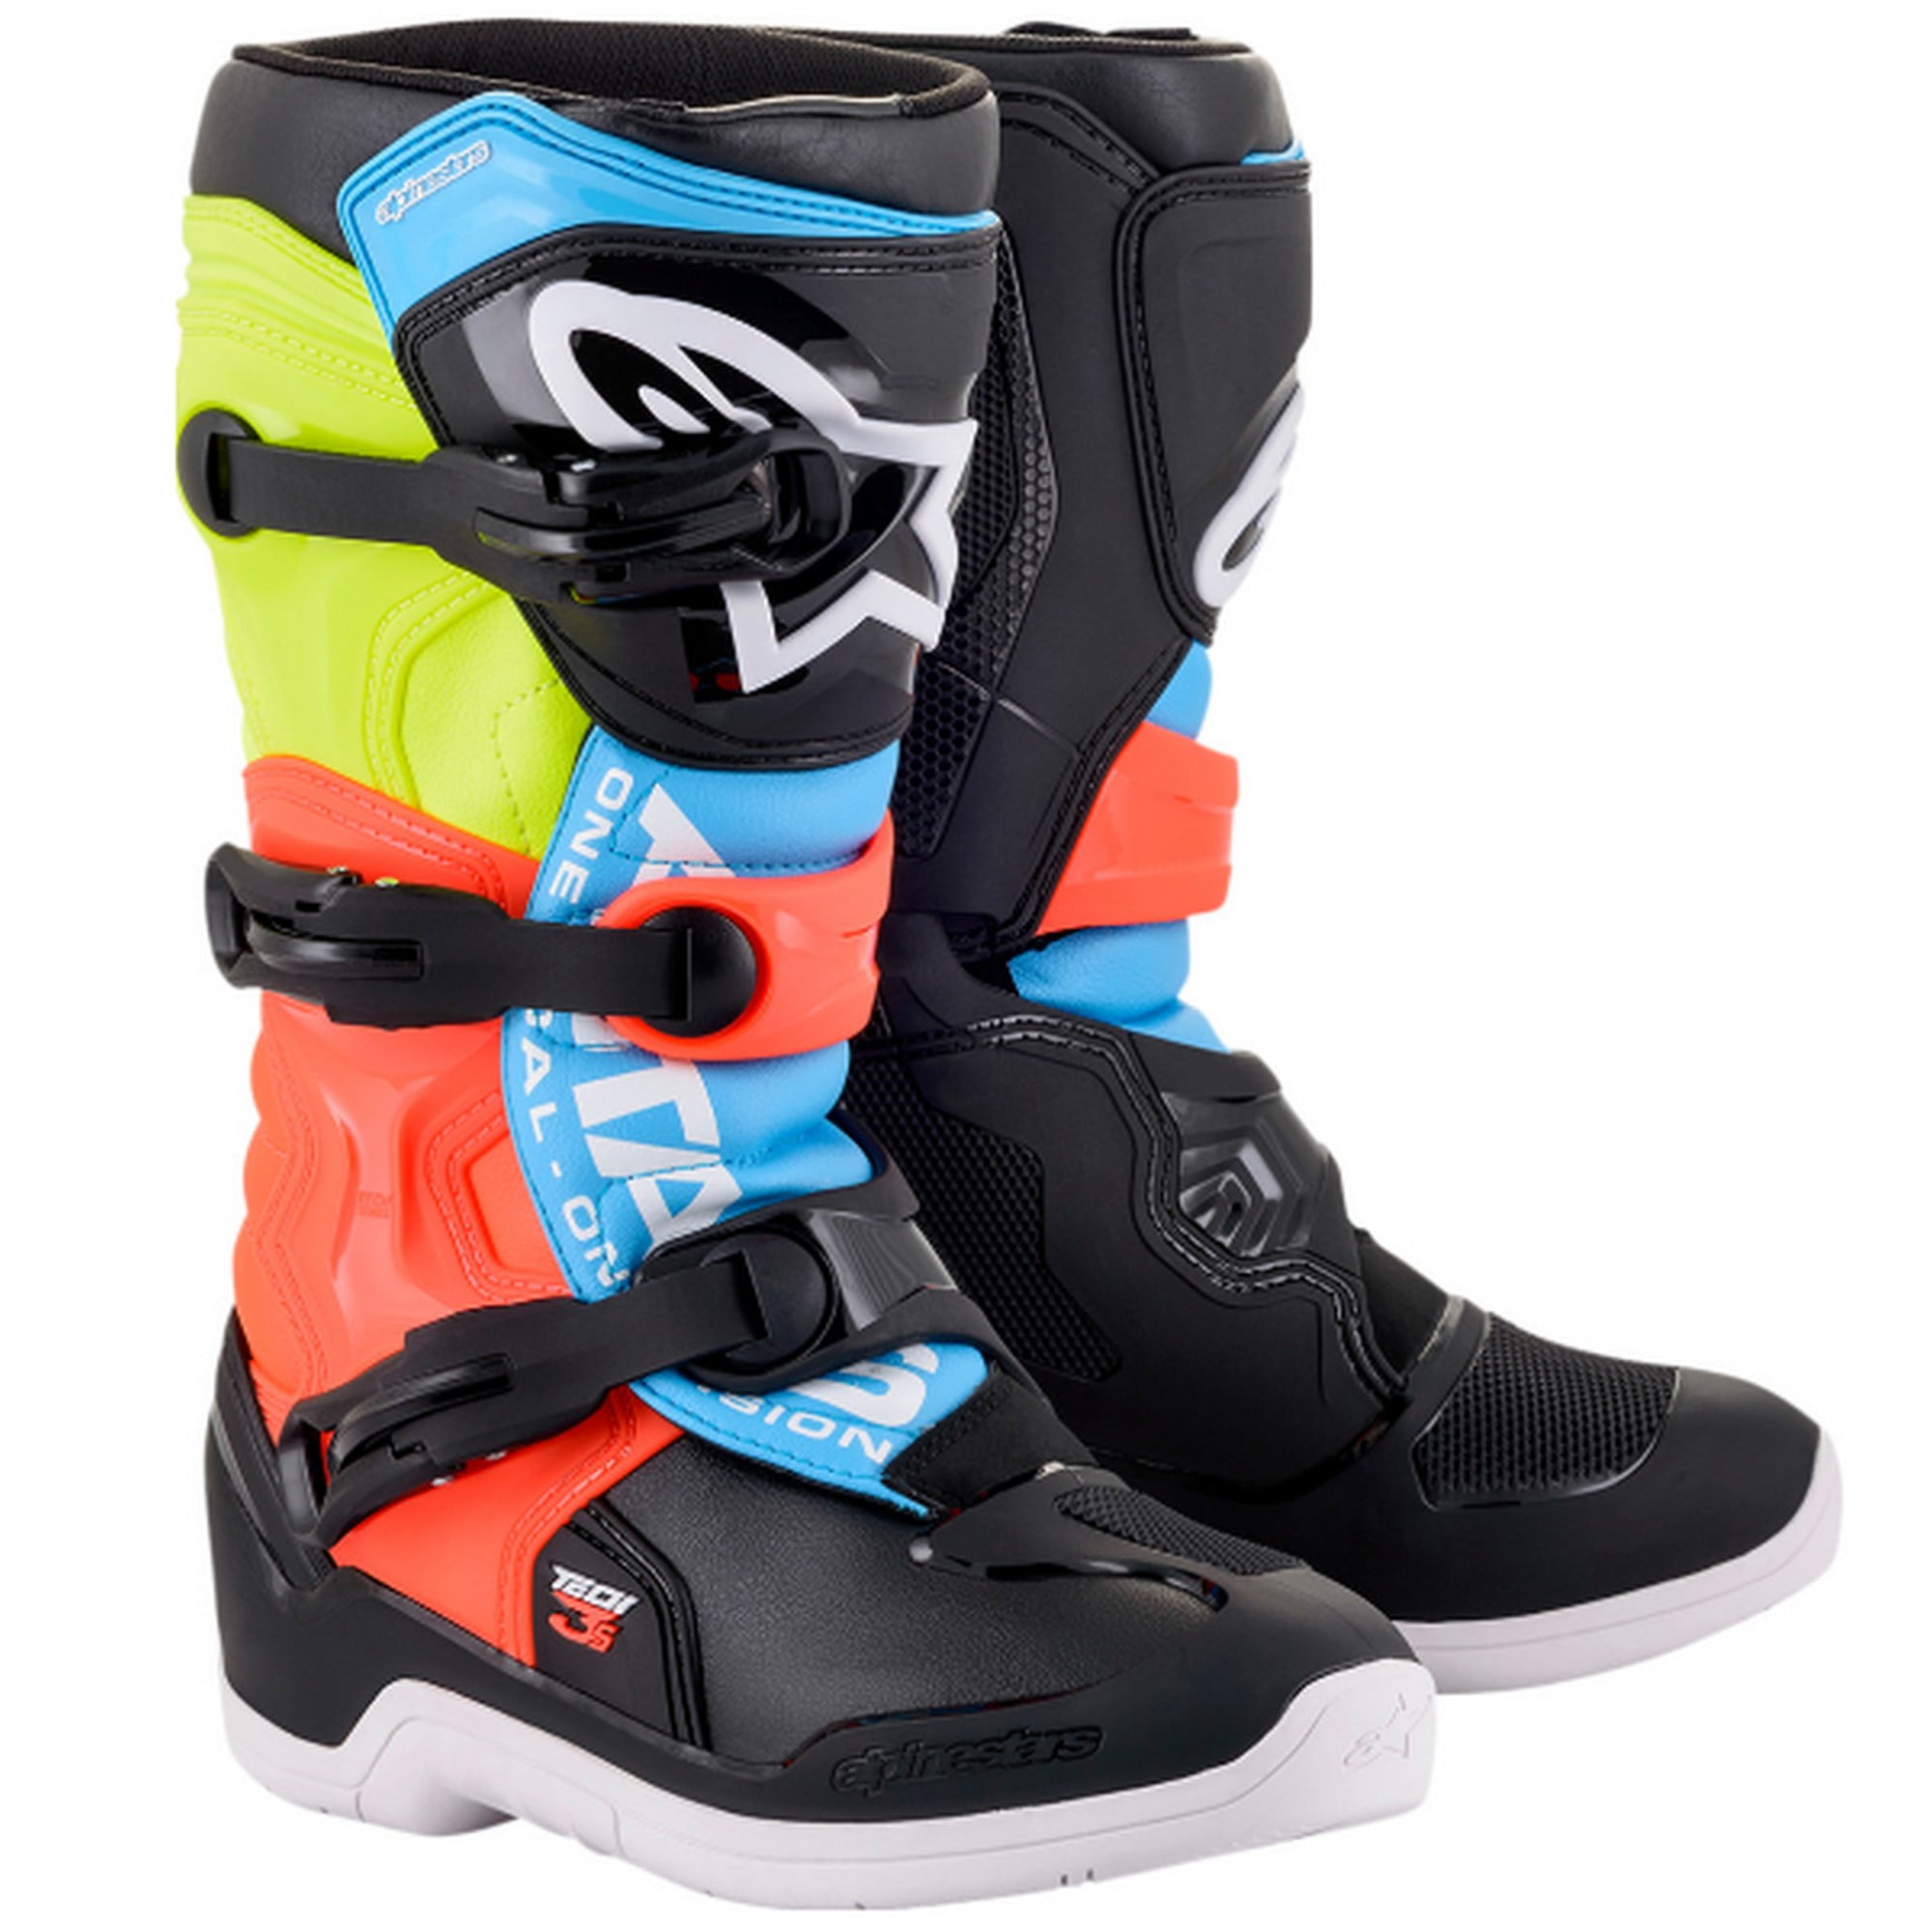 Blue/White/Red/Yellow, Size 4 2015017-7025-4 Alpinestars Unisex-Child Tech 7S Youth Boots